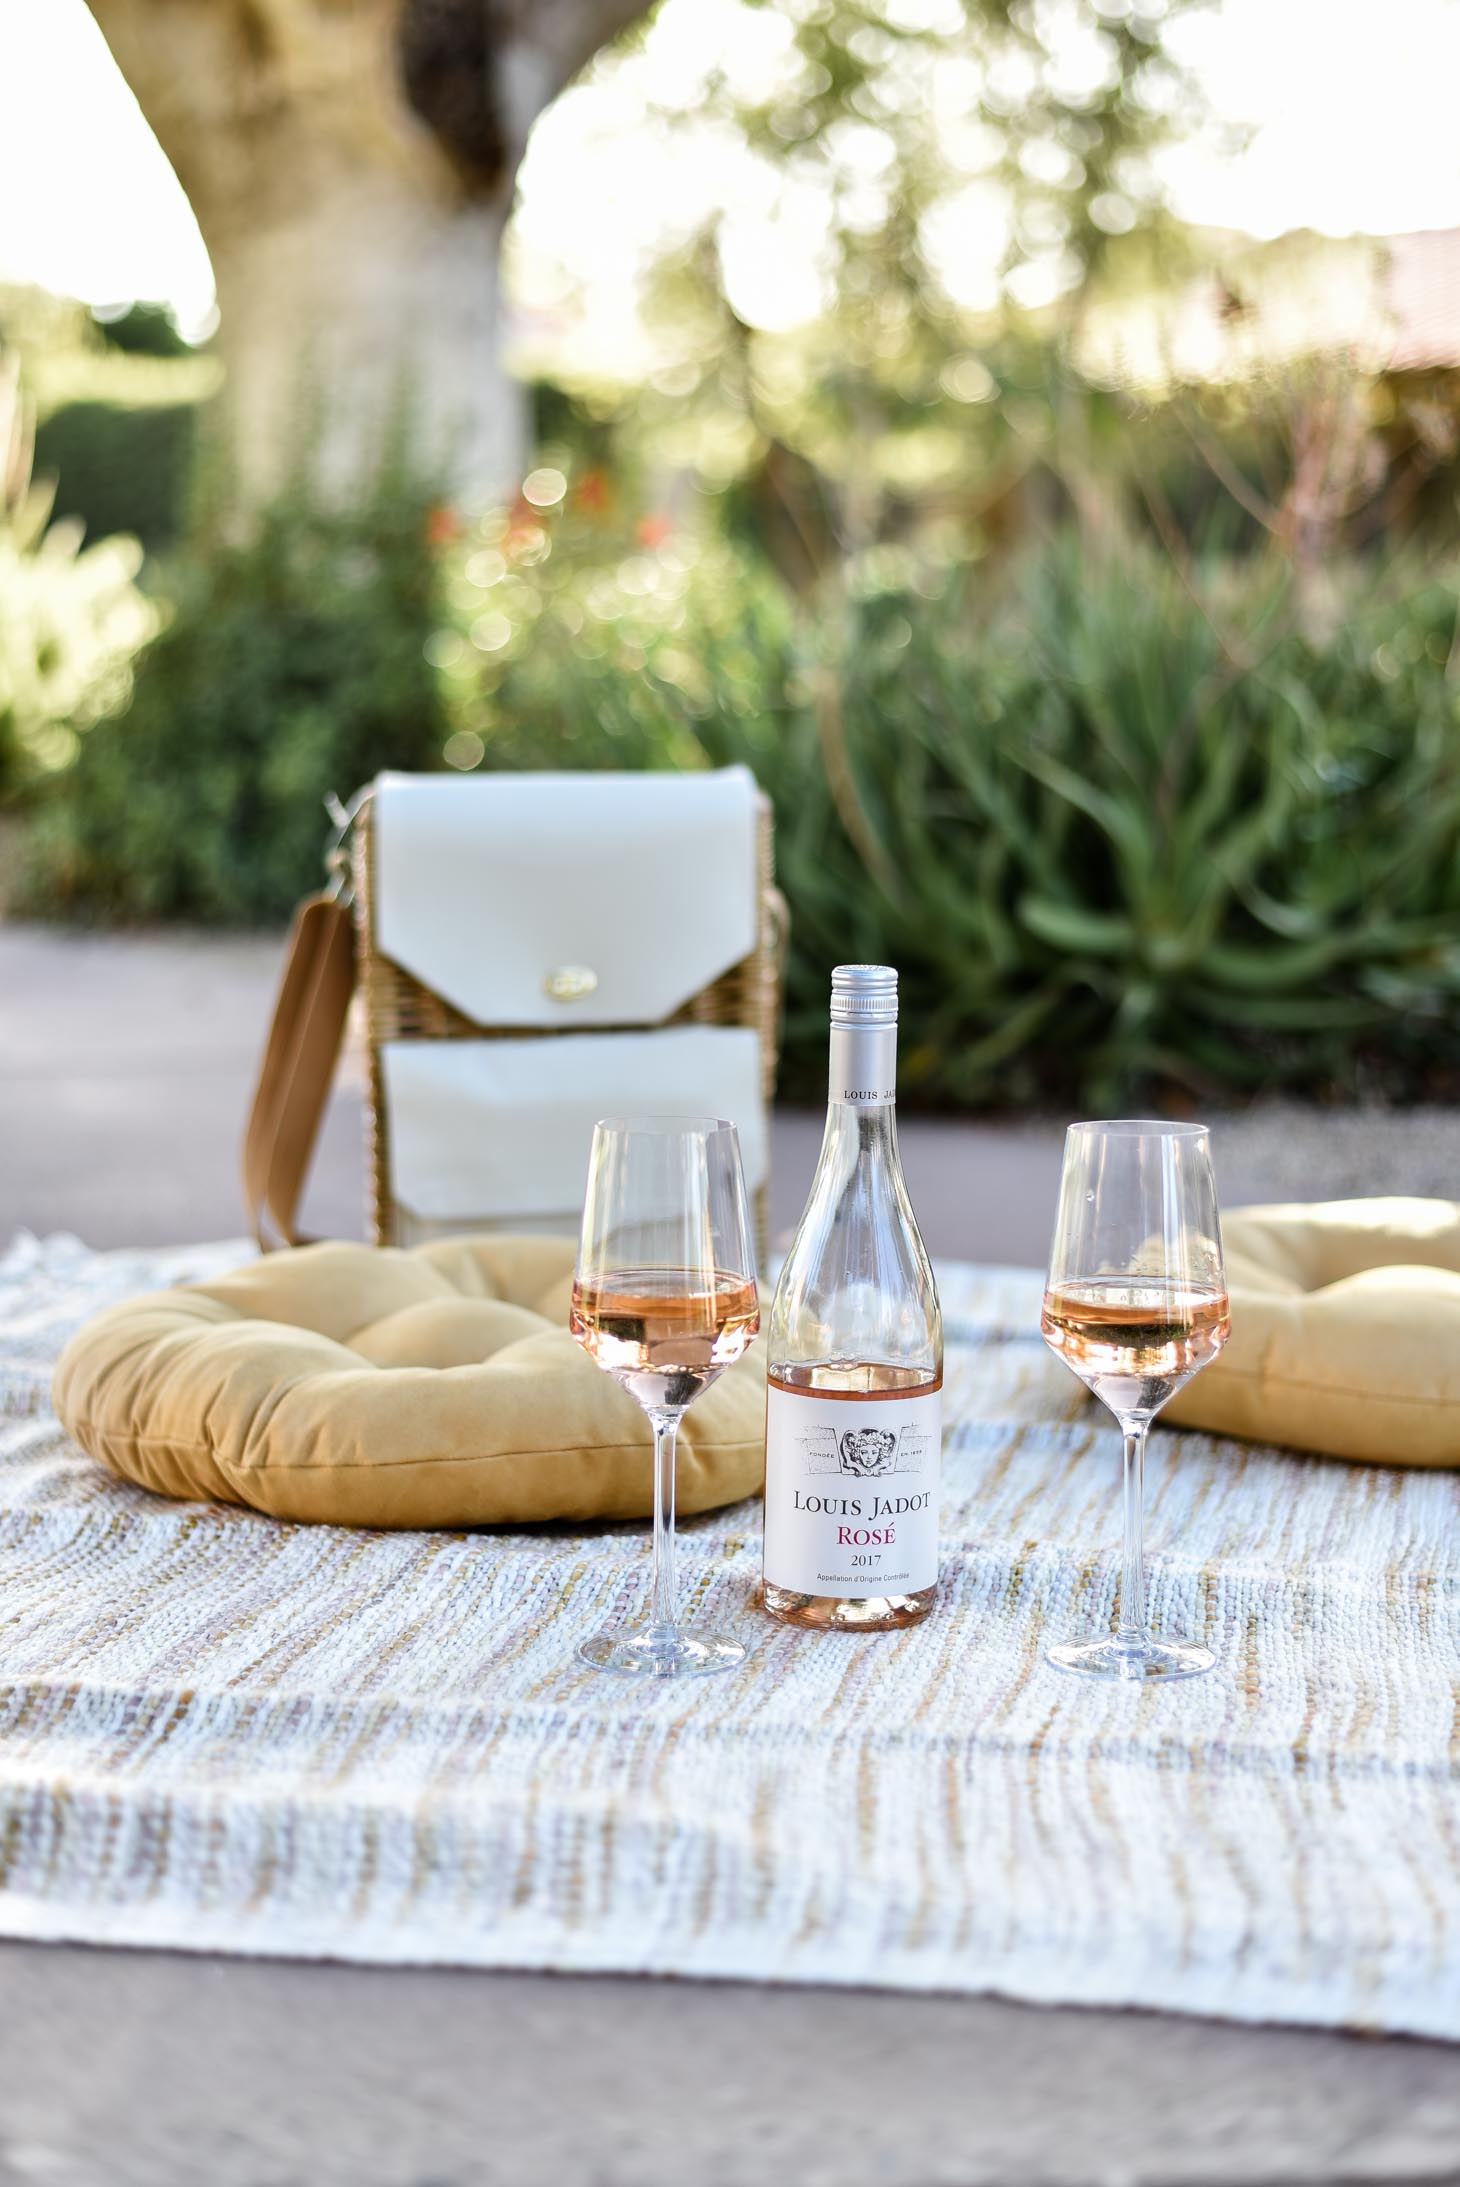 Erin Elizabeth of Wink and a Twirl shares information about the Blush International Rosé Festival in Old Town Scottsdale at the Clayton House